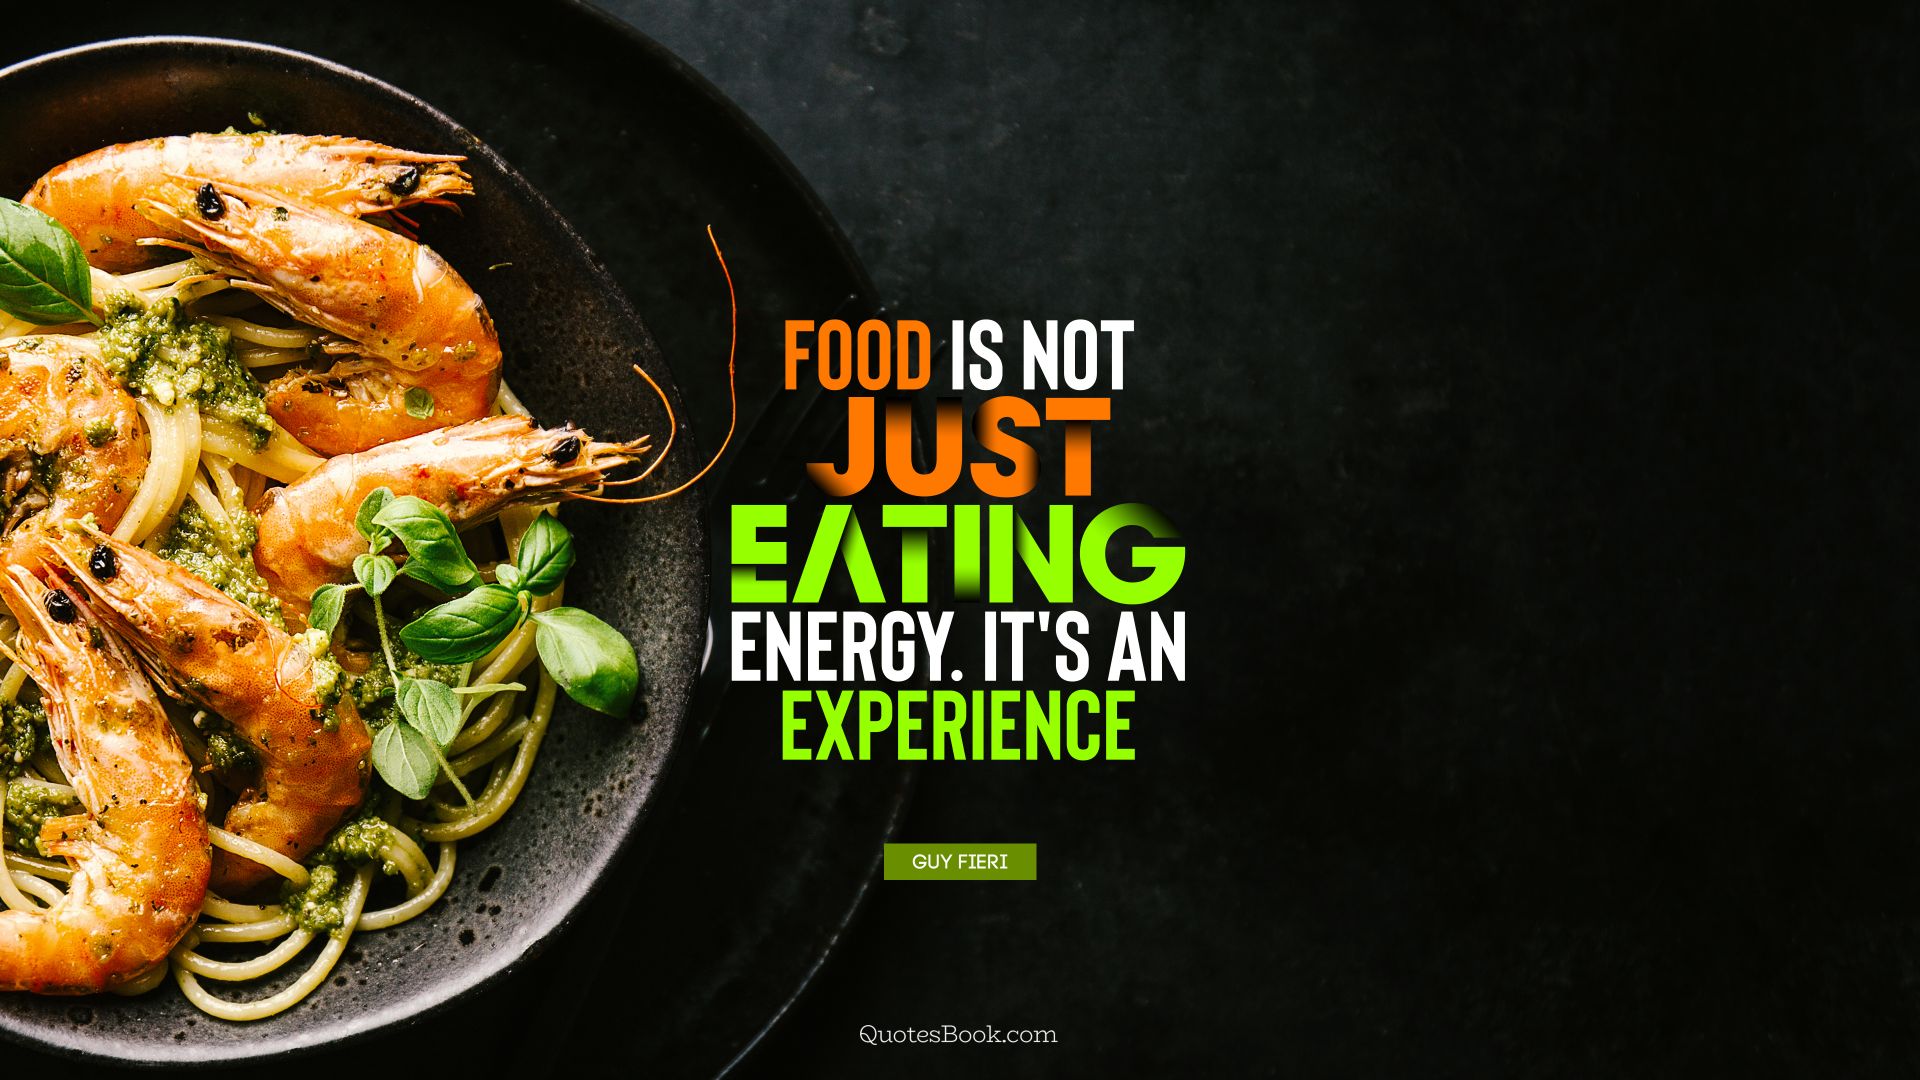 Food is not just eating energy. It's an experience. - Quote by Guy Fieri